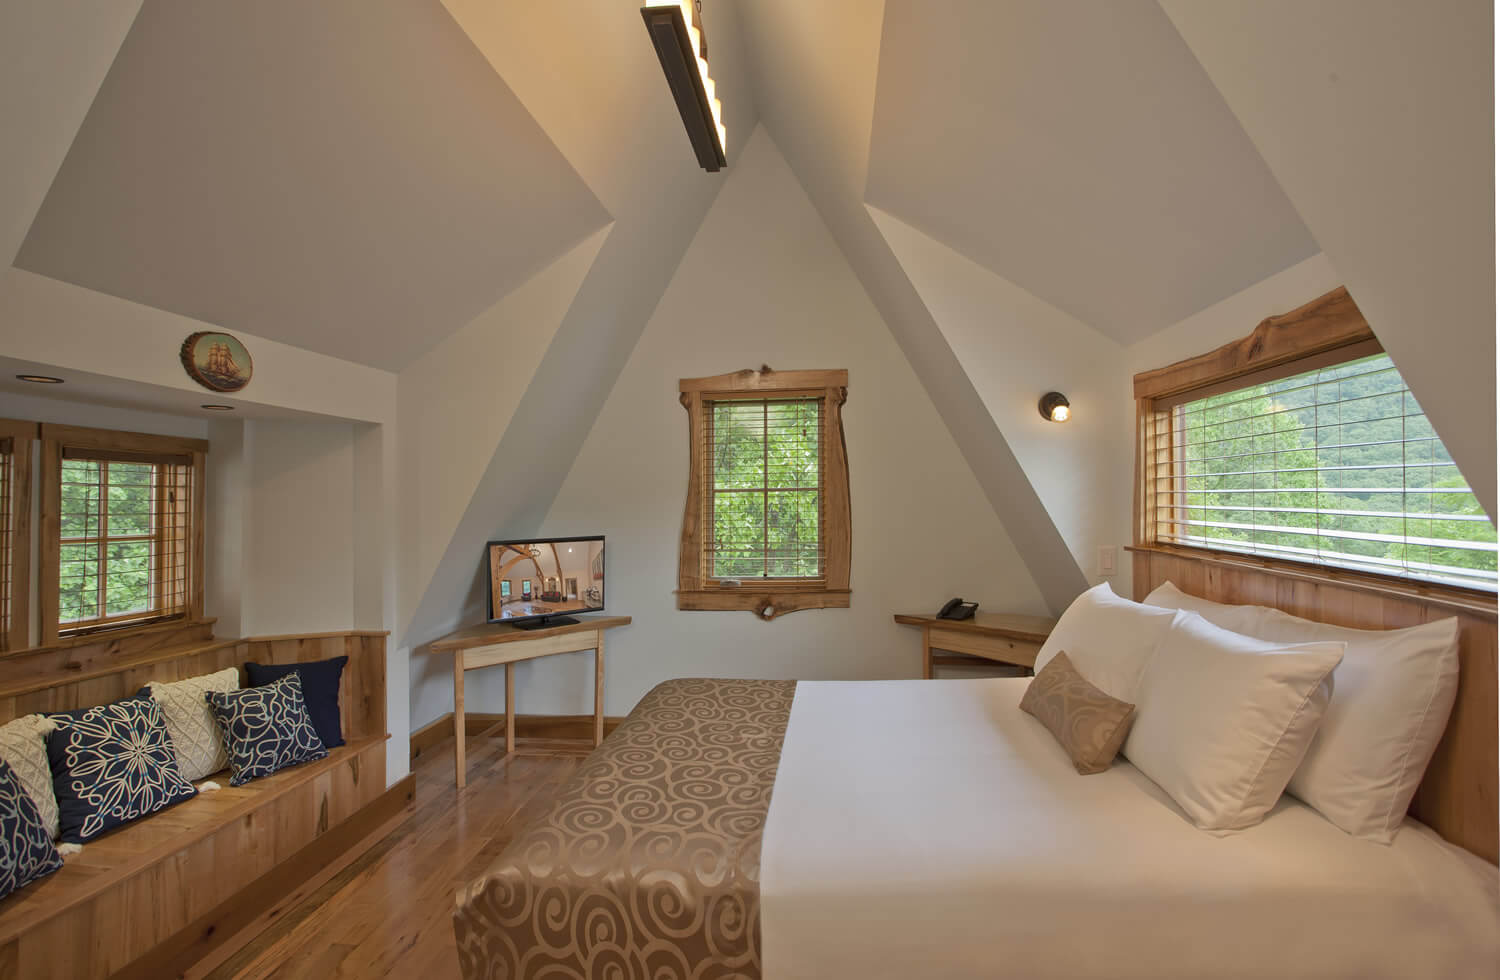 Cozy room with light blue walls and steep sloped roof. One queen bed and build-in bench with many soft pillows.